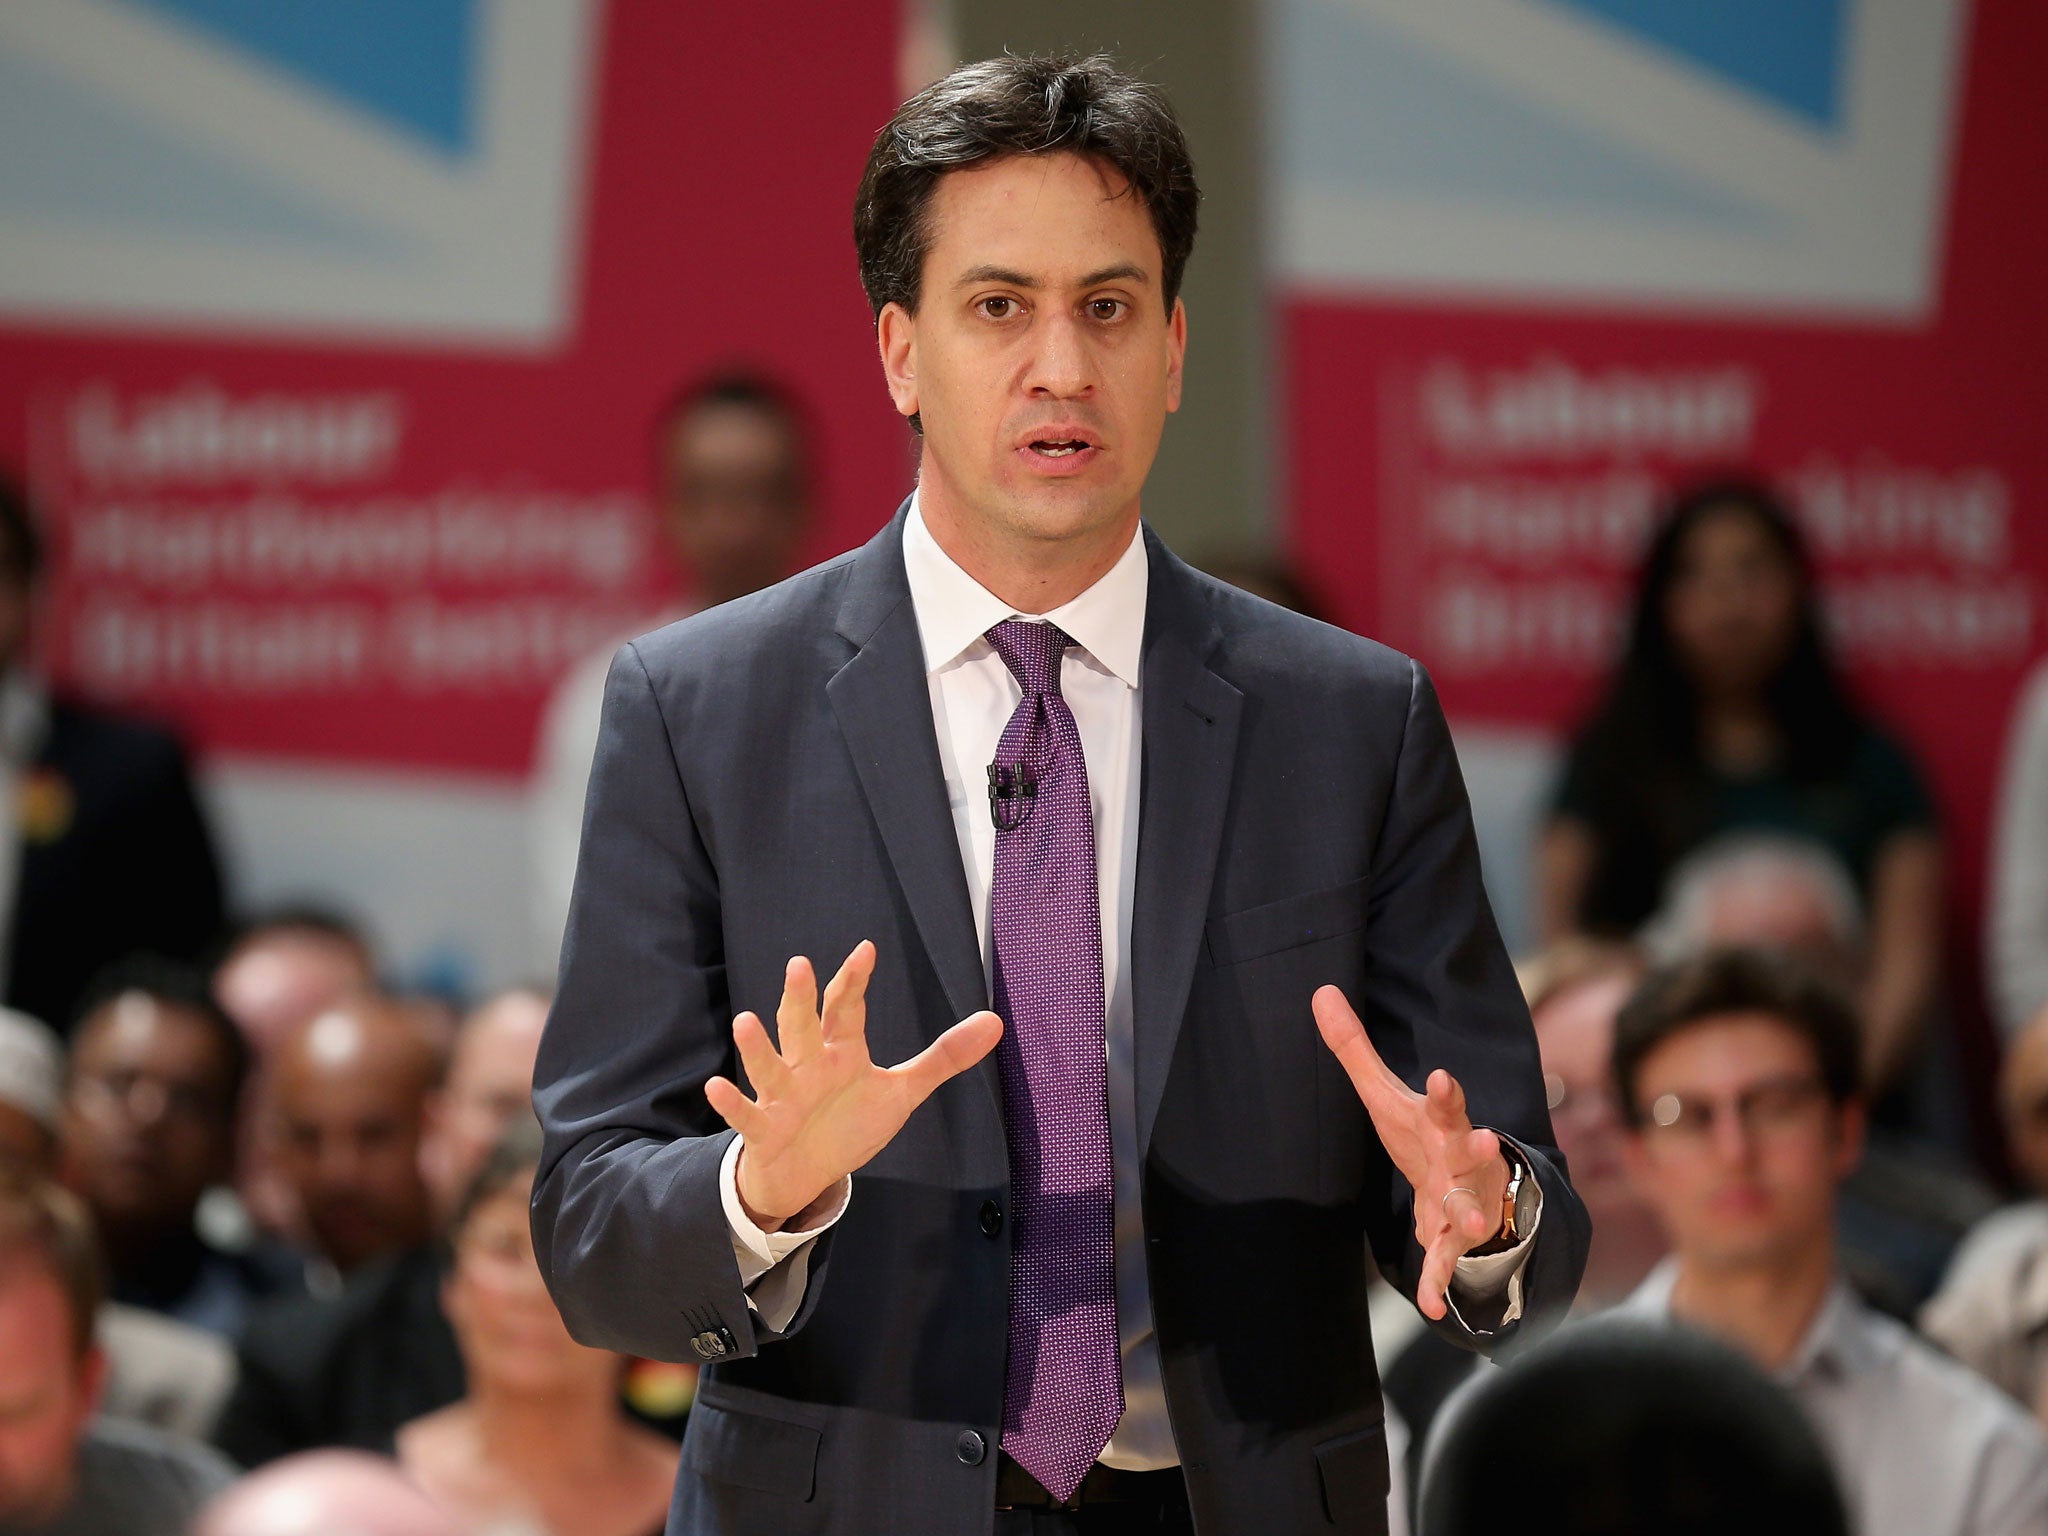 Ed Miliband will be put under pressure from Labour MPs calling on him to promise a referendum on Europe in the wake of the Euro elections